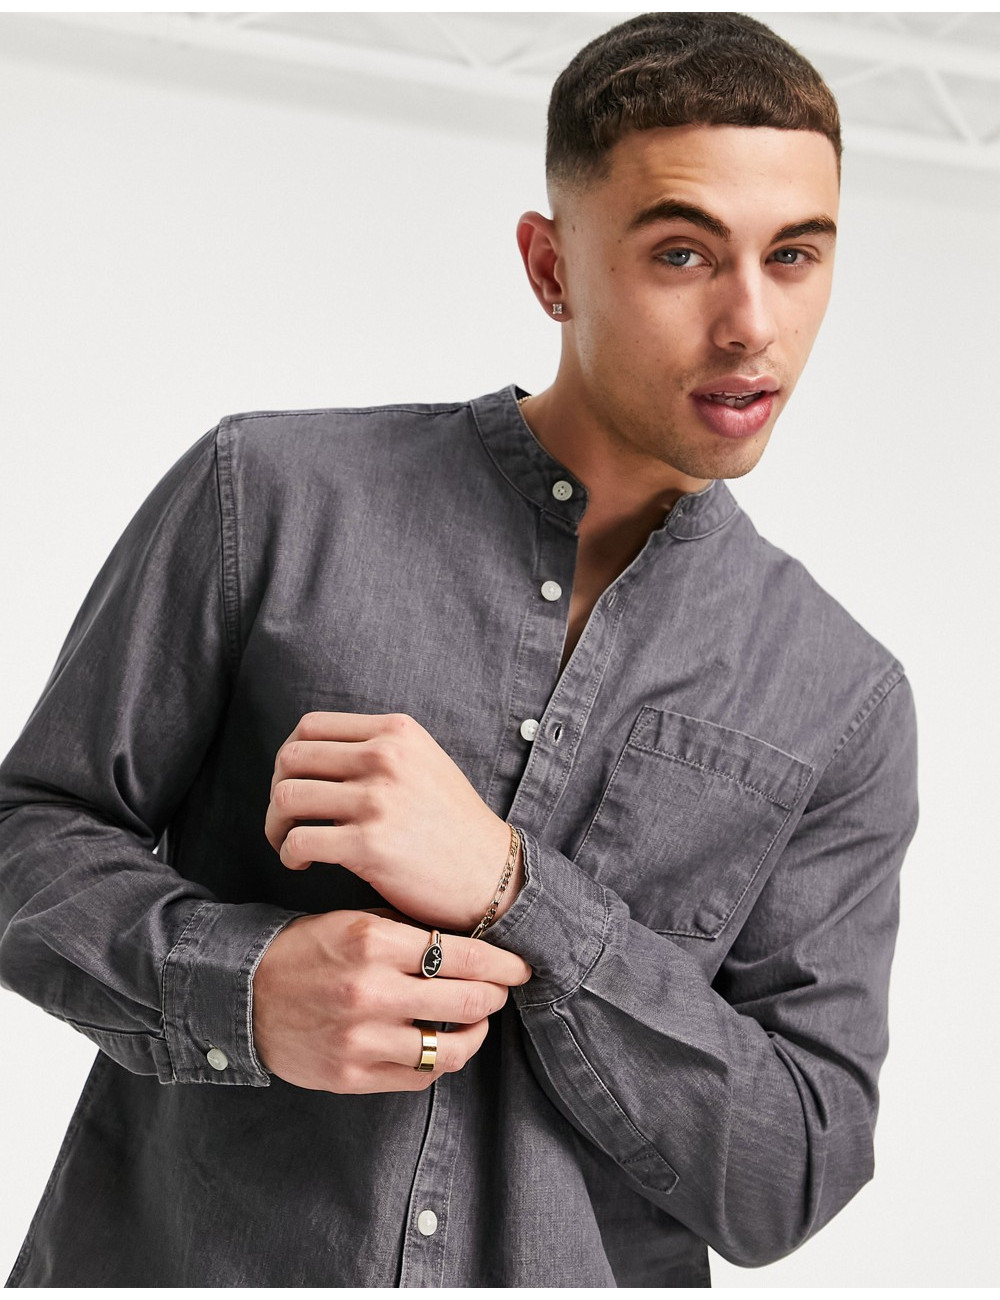 New Look denim shirt with...